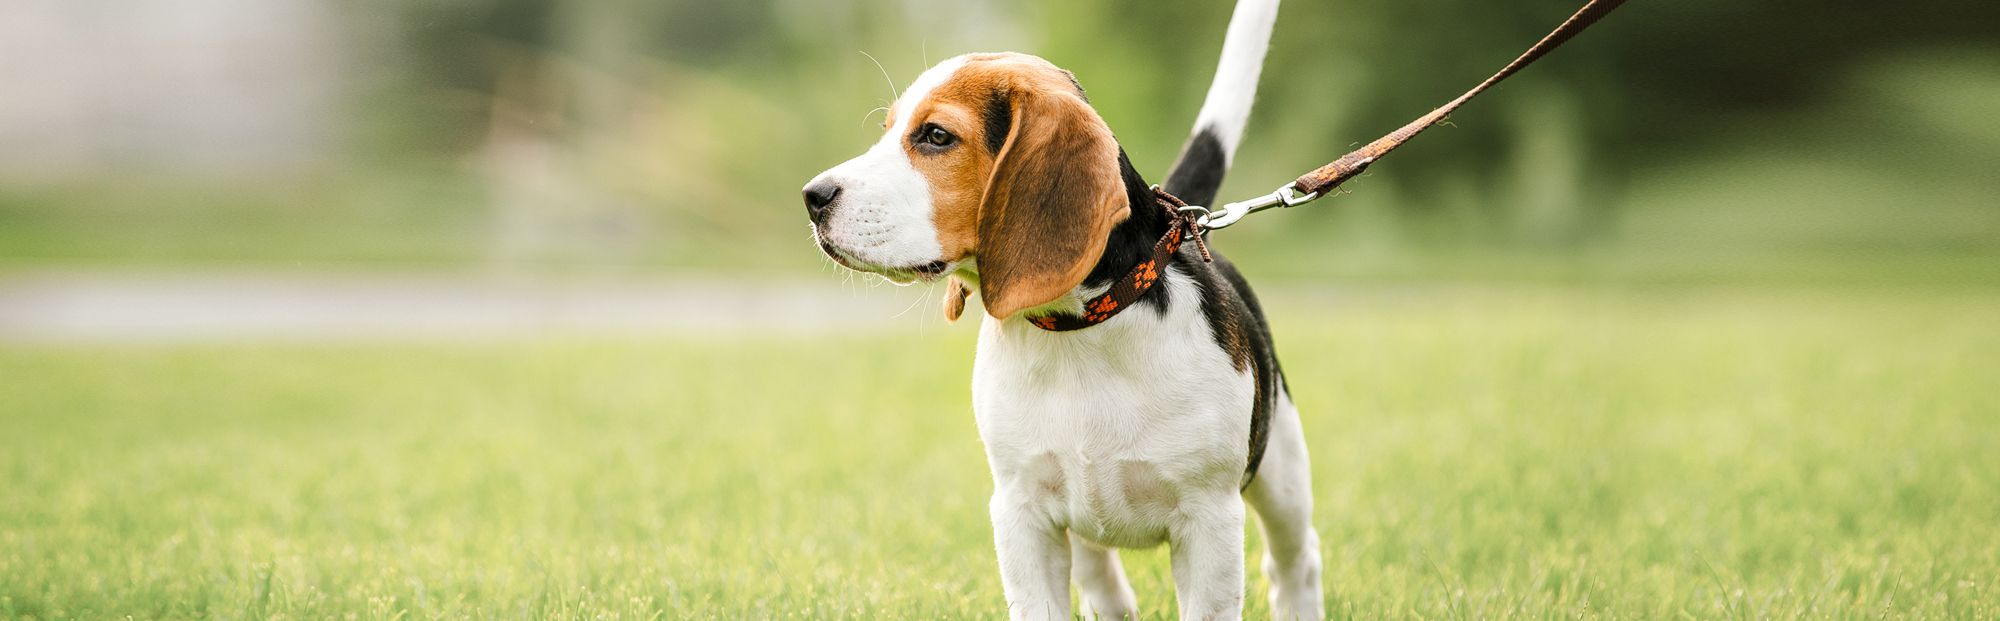 Beagle going for a walk